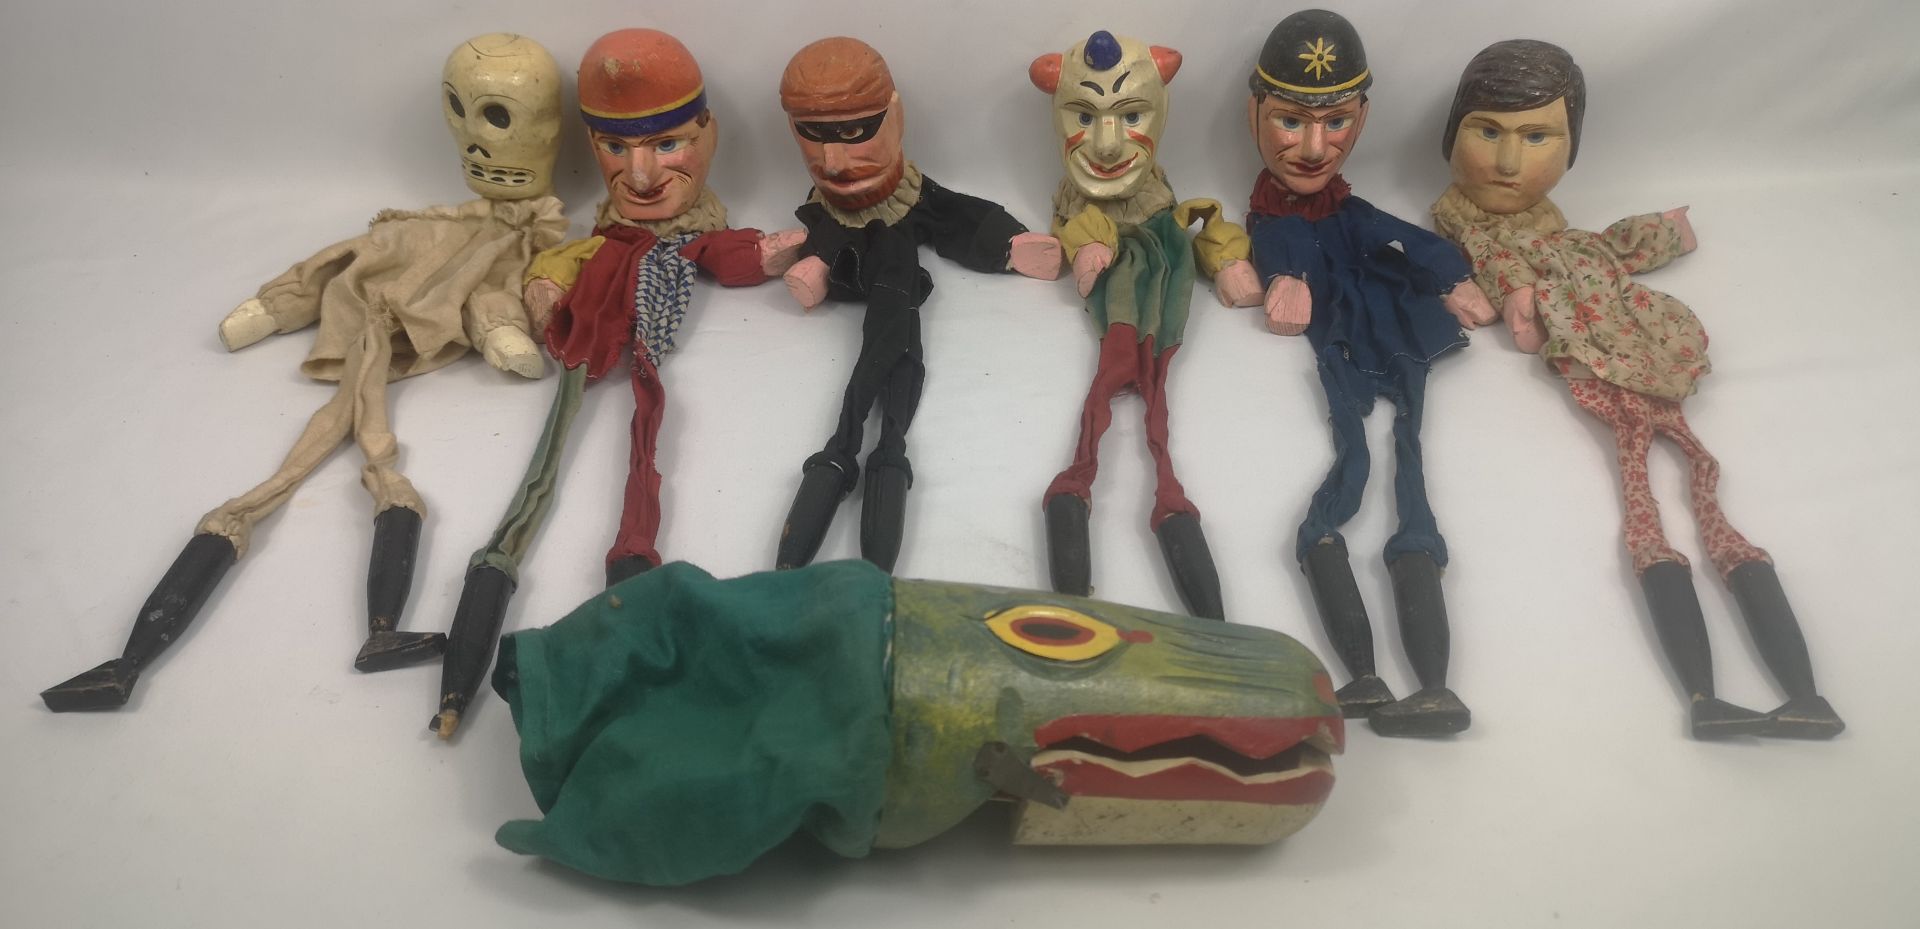 Early 20th century set of wood Punch and Judy puppets